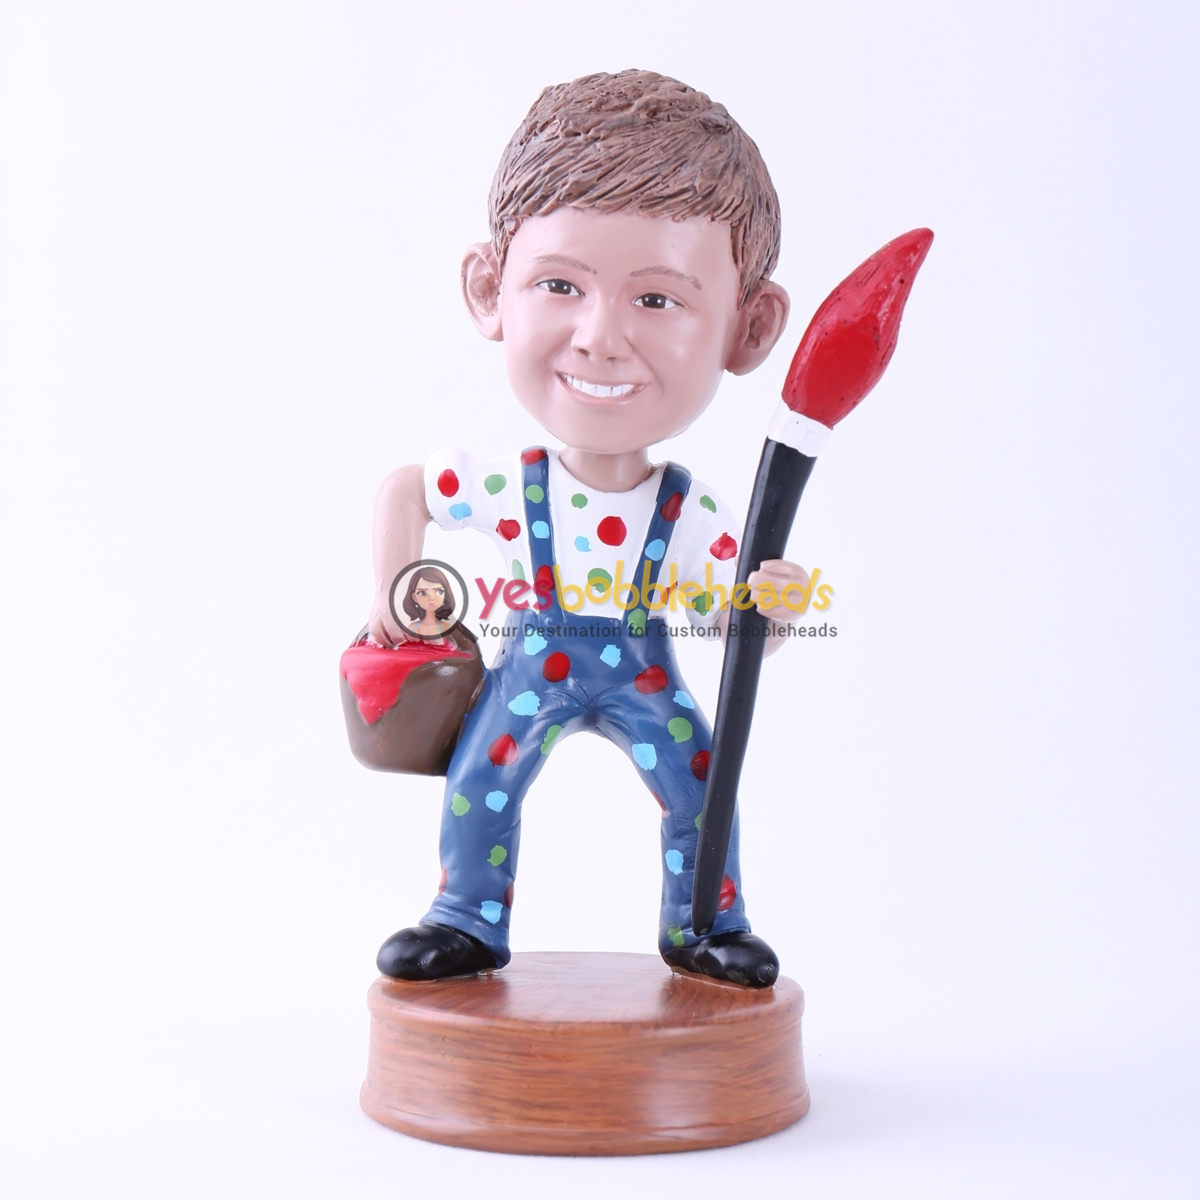 Picture of Custom Bobblehead Doll: Man and Writing Brush